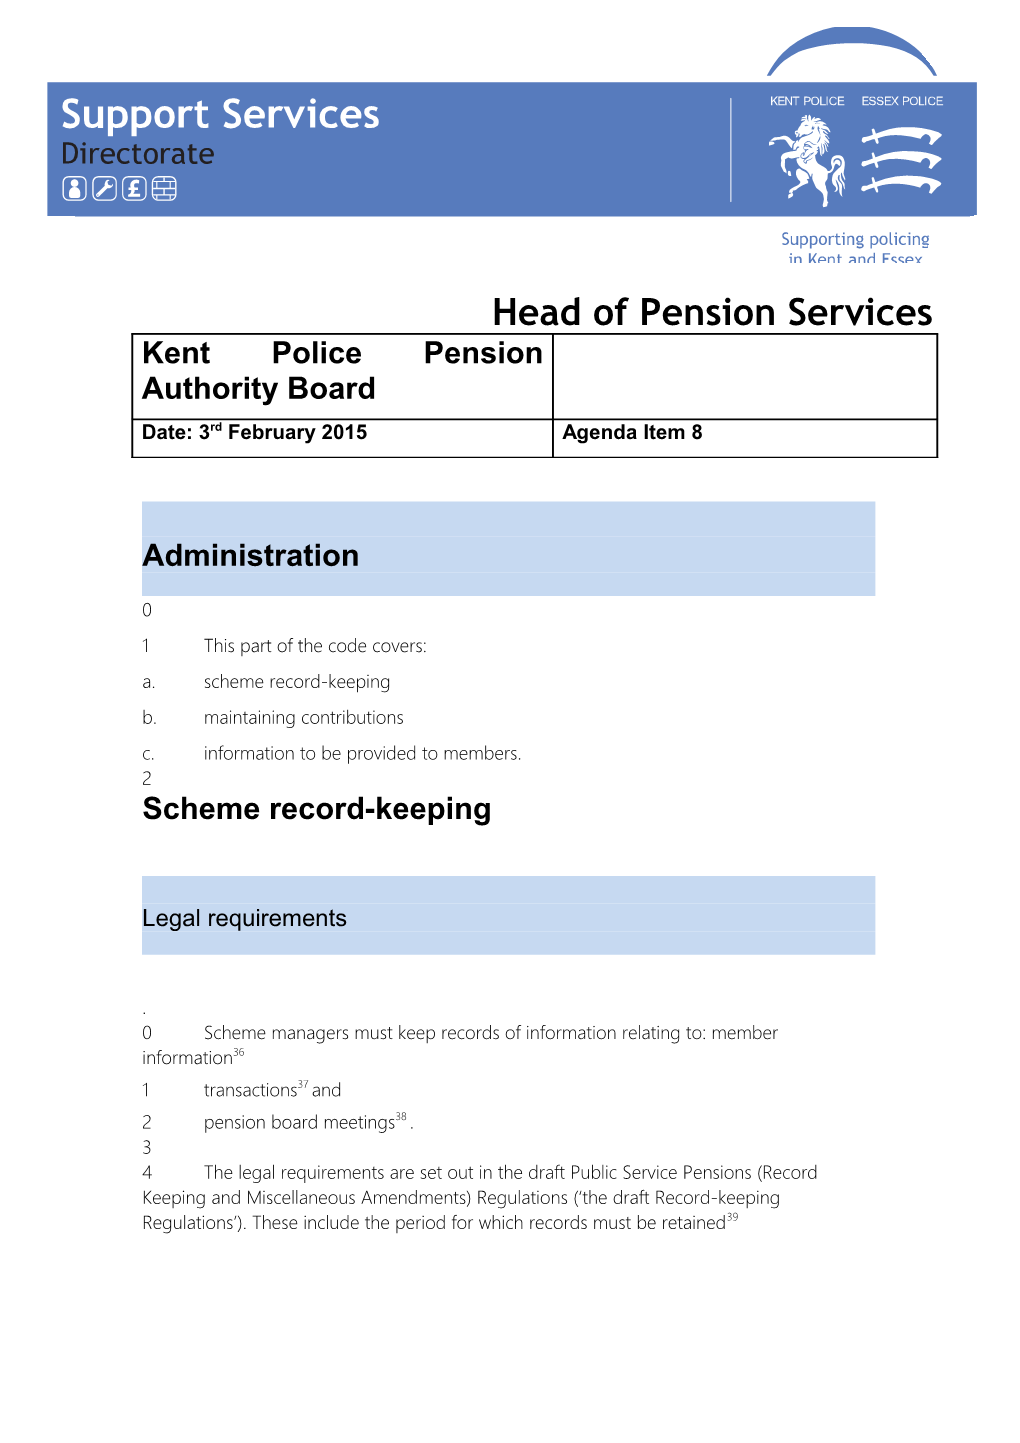 Head of Pension Services